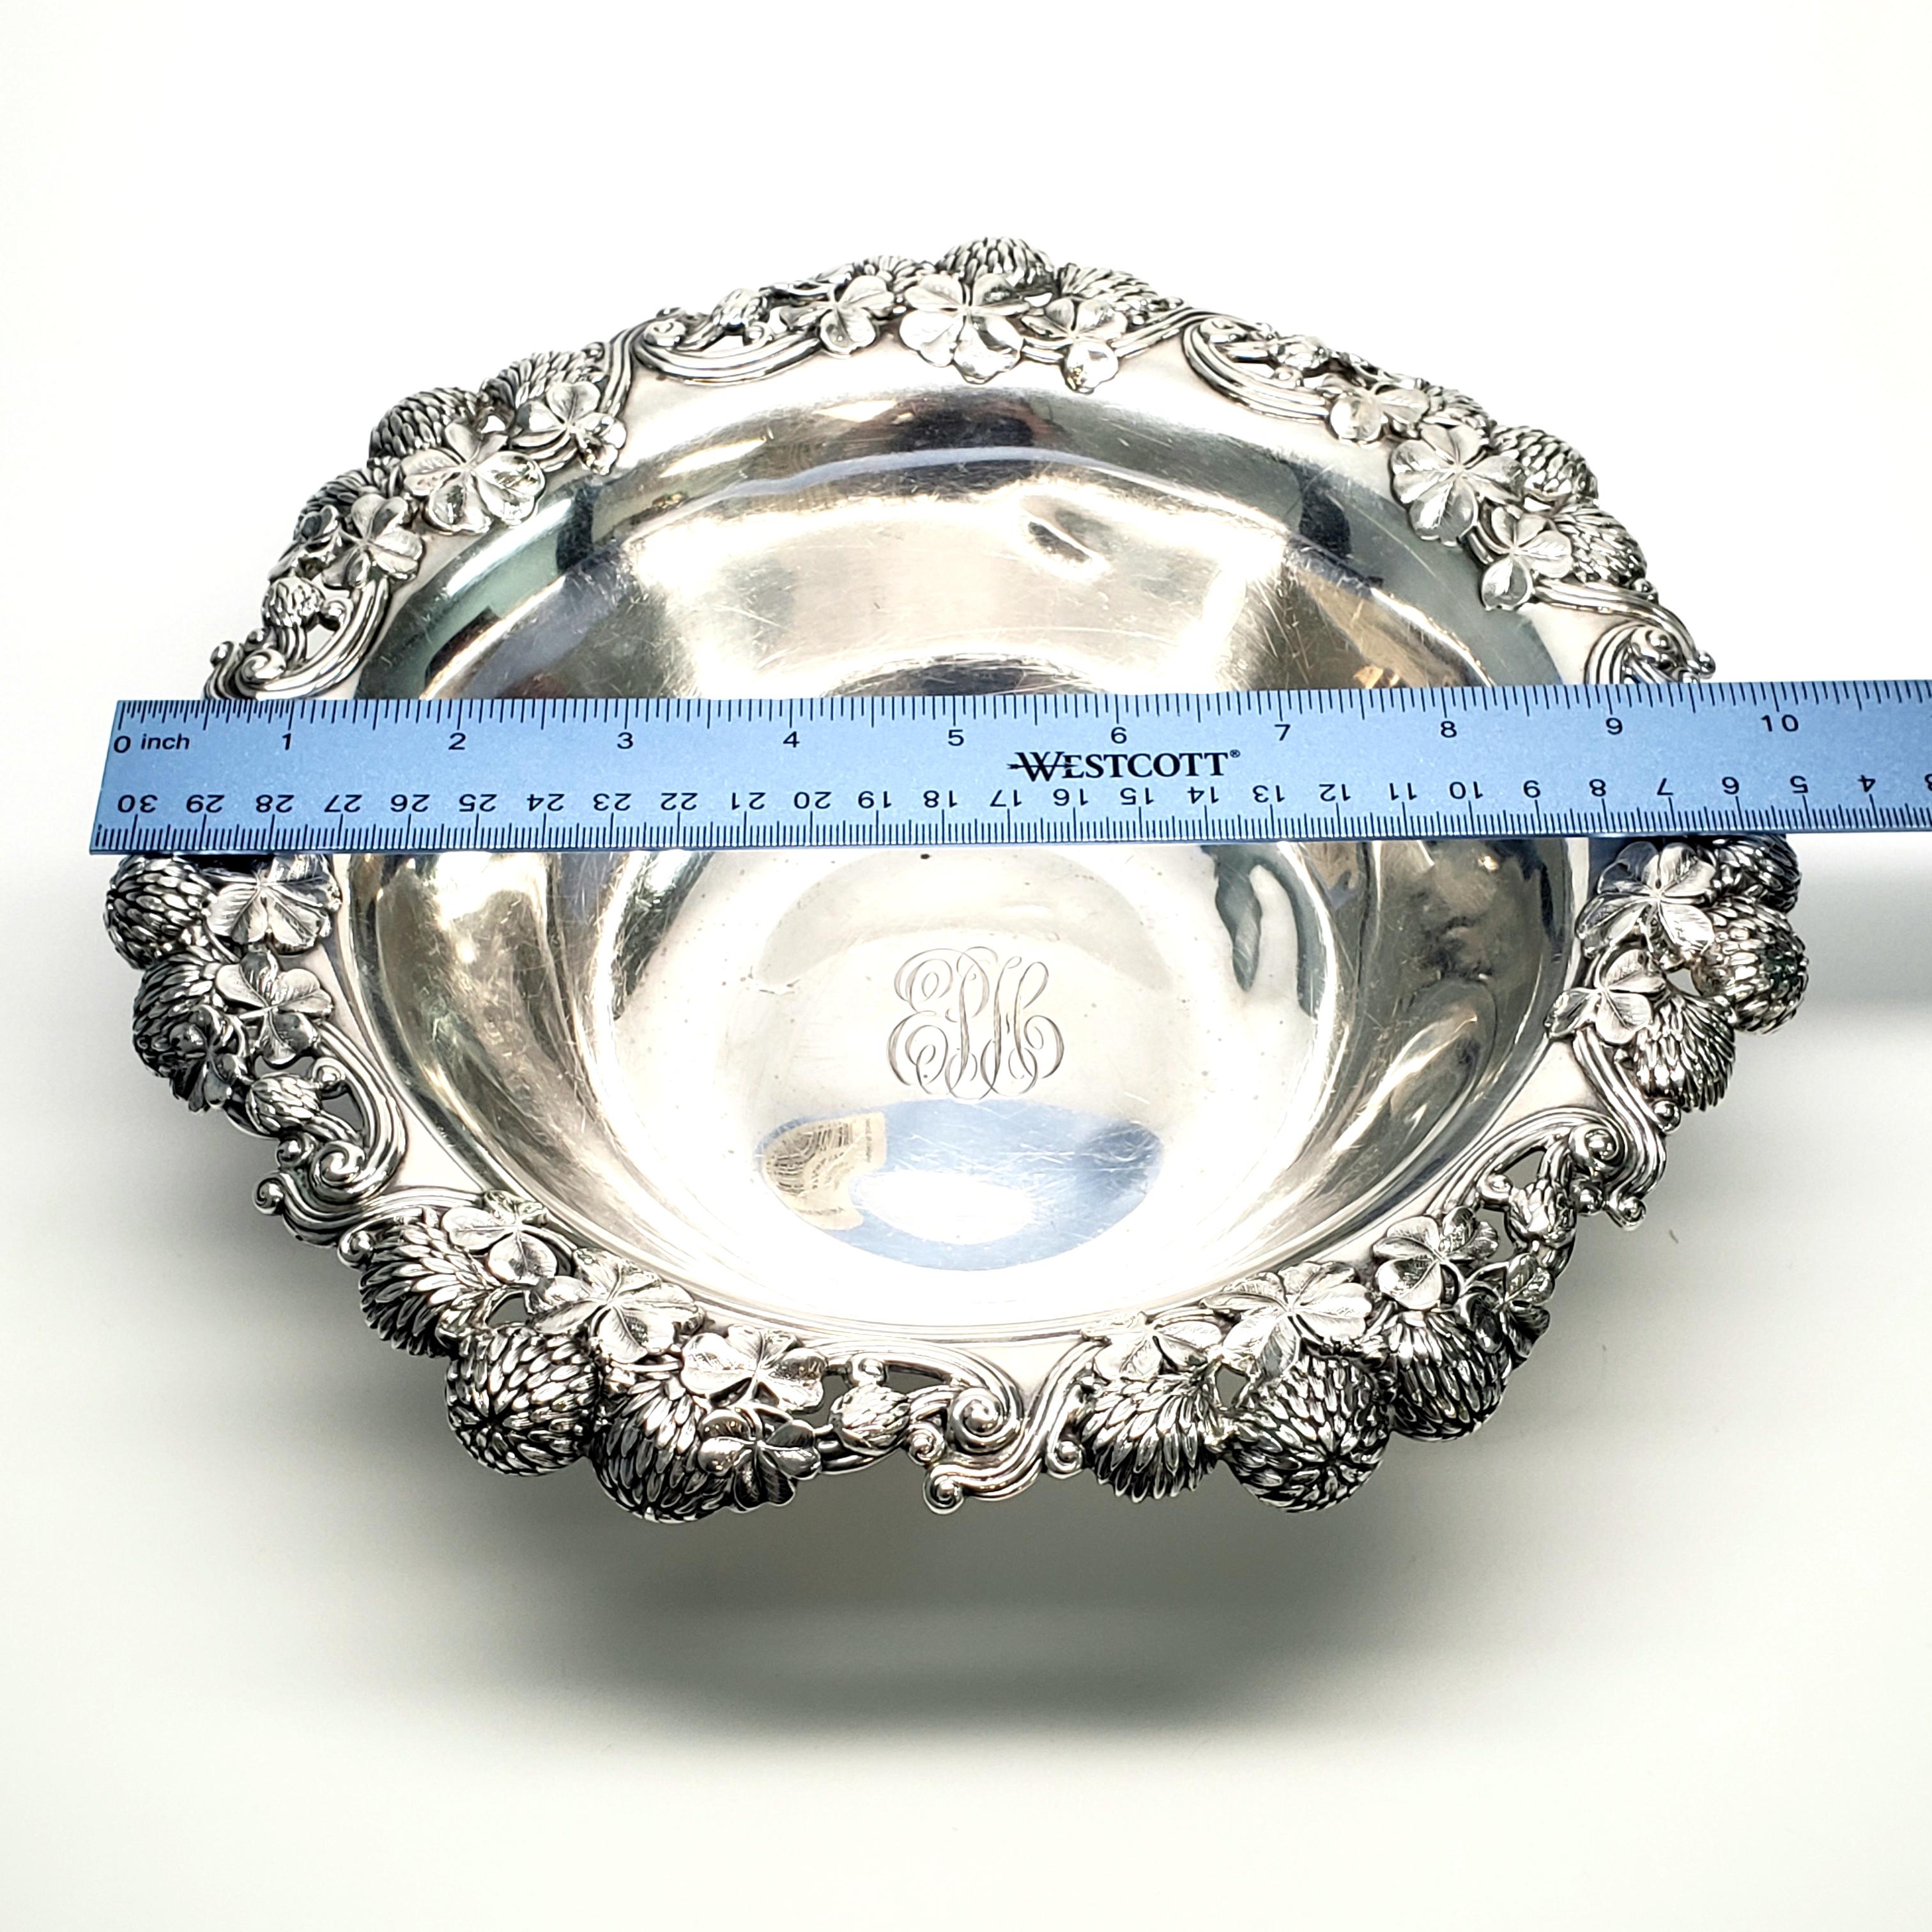 Tiffany & Co. Sterling Silver Bowl Clover Pattern with Monogram 1